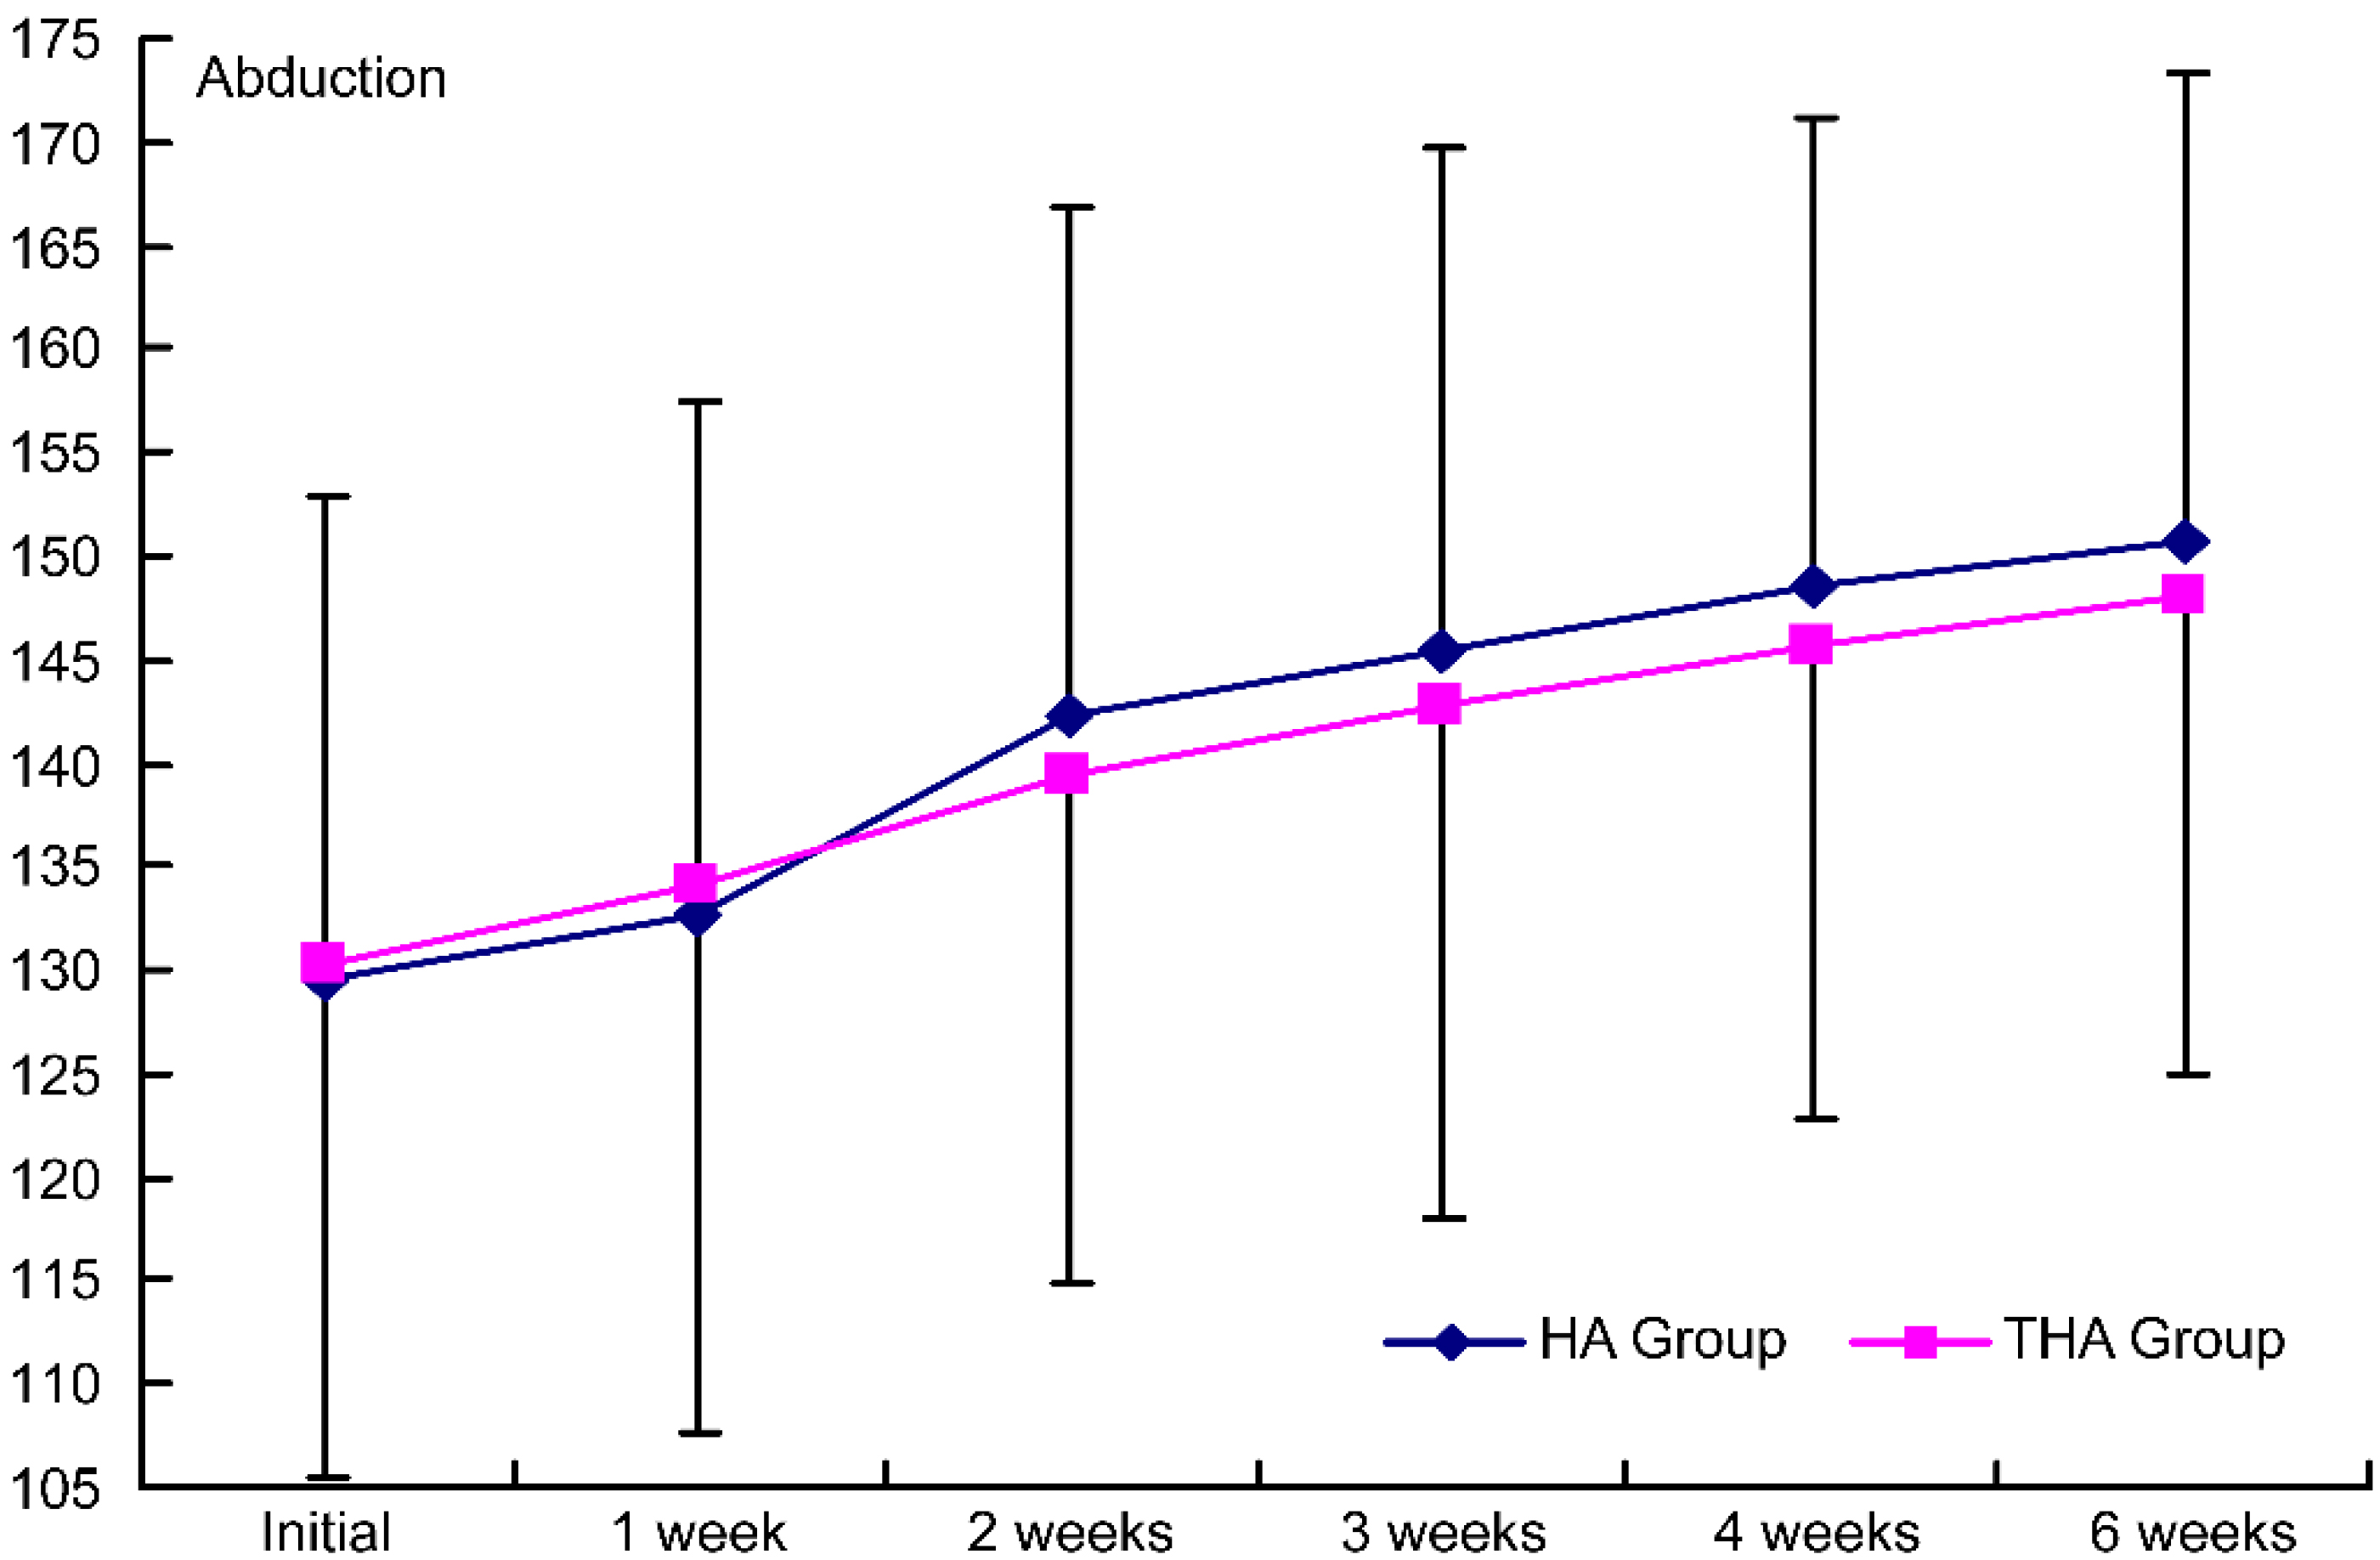 Intergroup comparison of the injection effects on abduction. HA group, hyaluronate group; THA group, hyaluronate plus tramadol group.